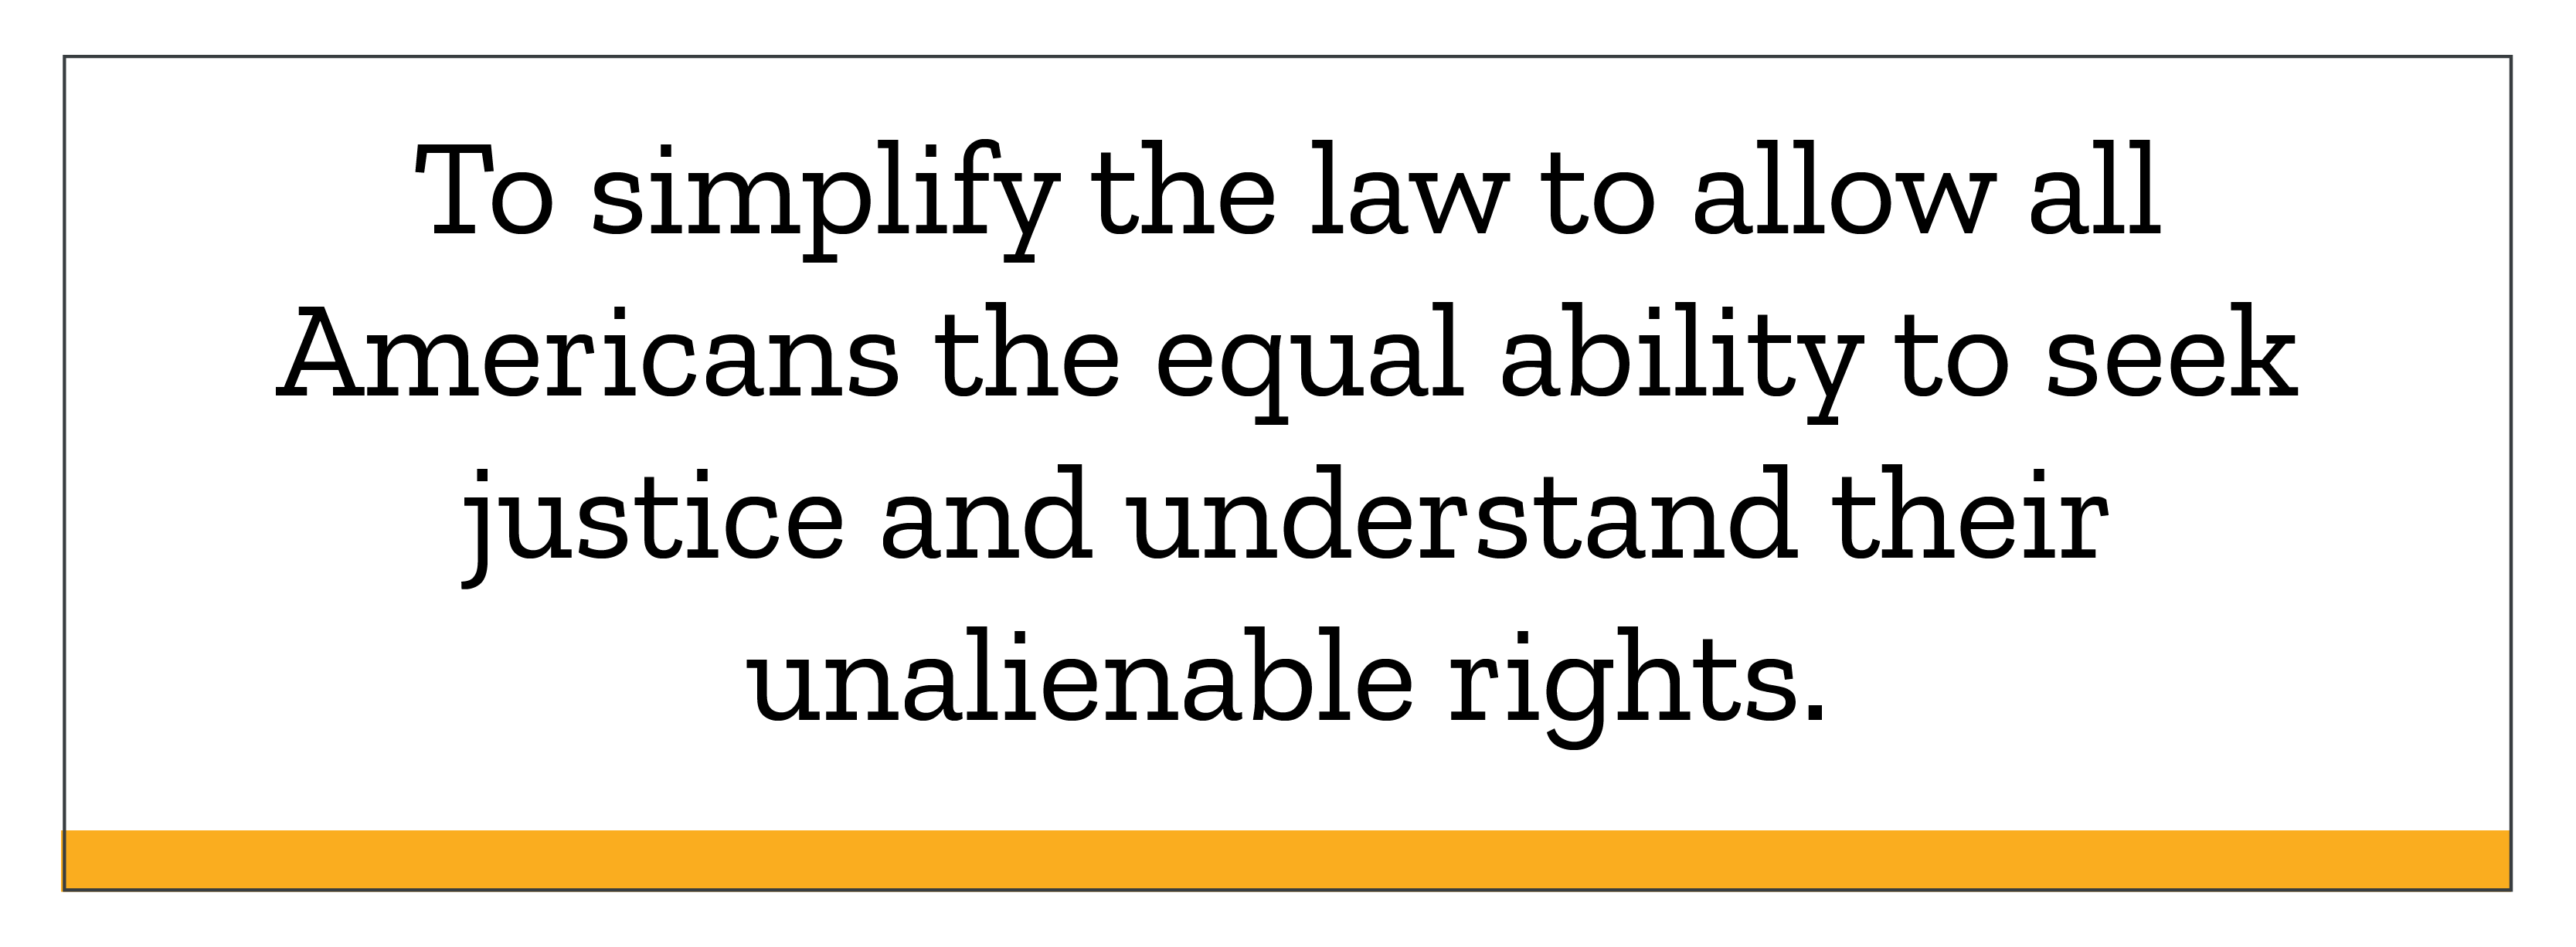 To simplify the law to allow all Americans the equal ability to seek justice and understand their unalienable rights.